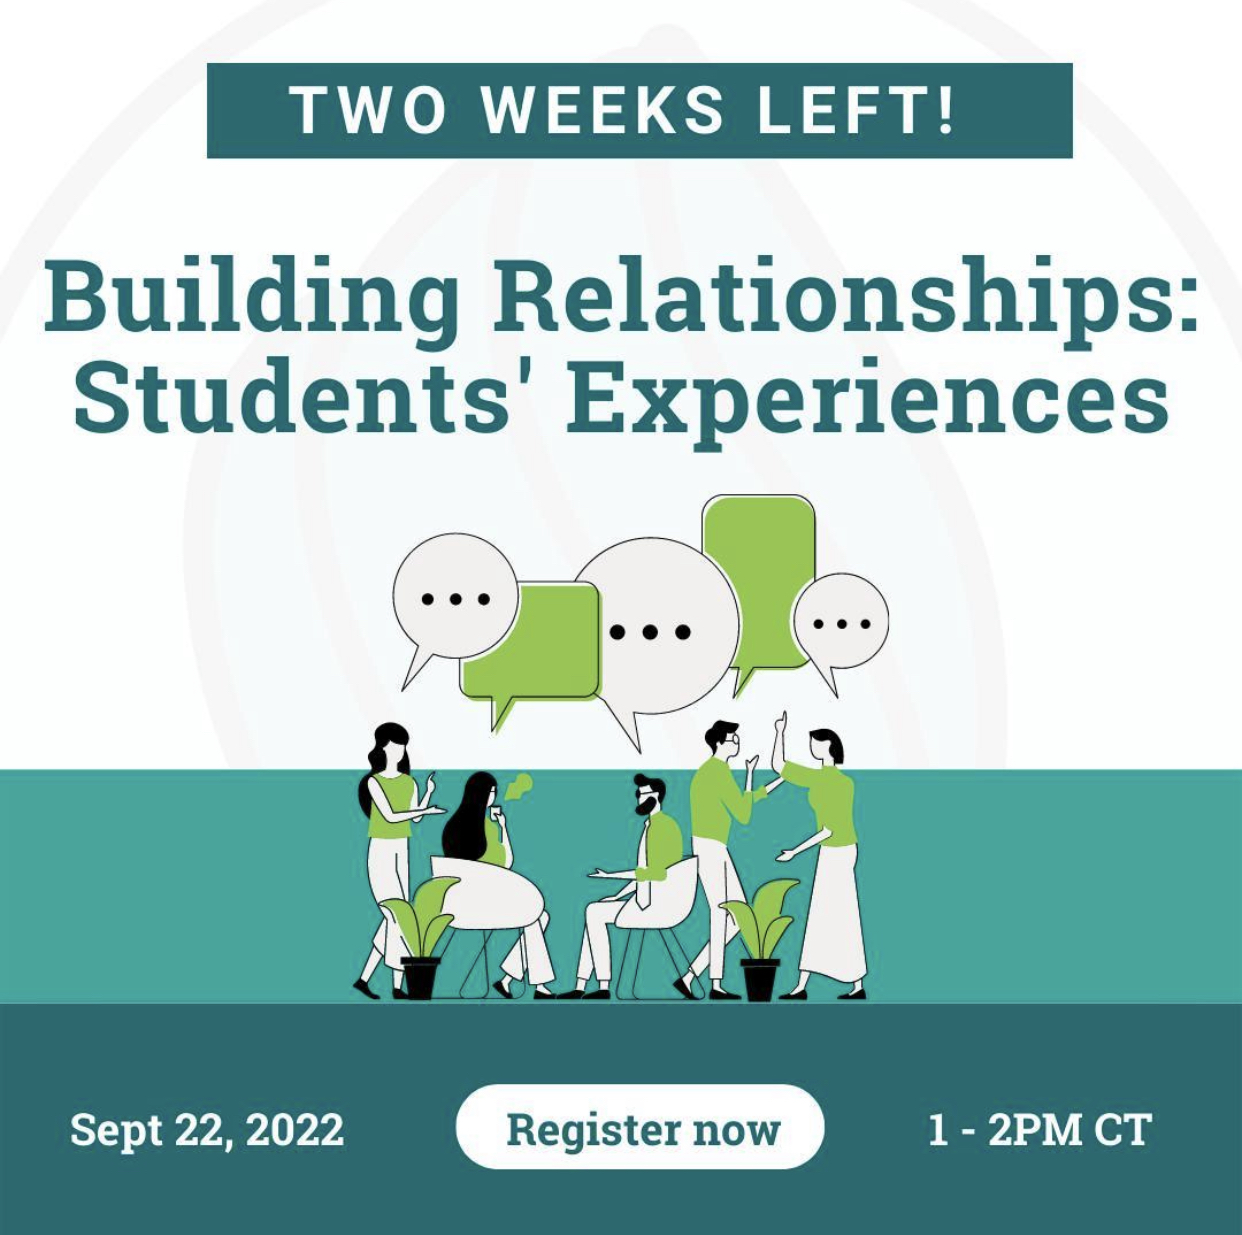 The image appears to be a screenshot of a graphical user interface displaying a text message or application interface. The message contains information about an event titled "Building Relationships: Students' Experiences" with a date and time for registration.